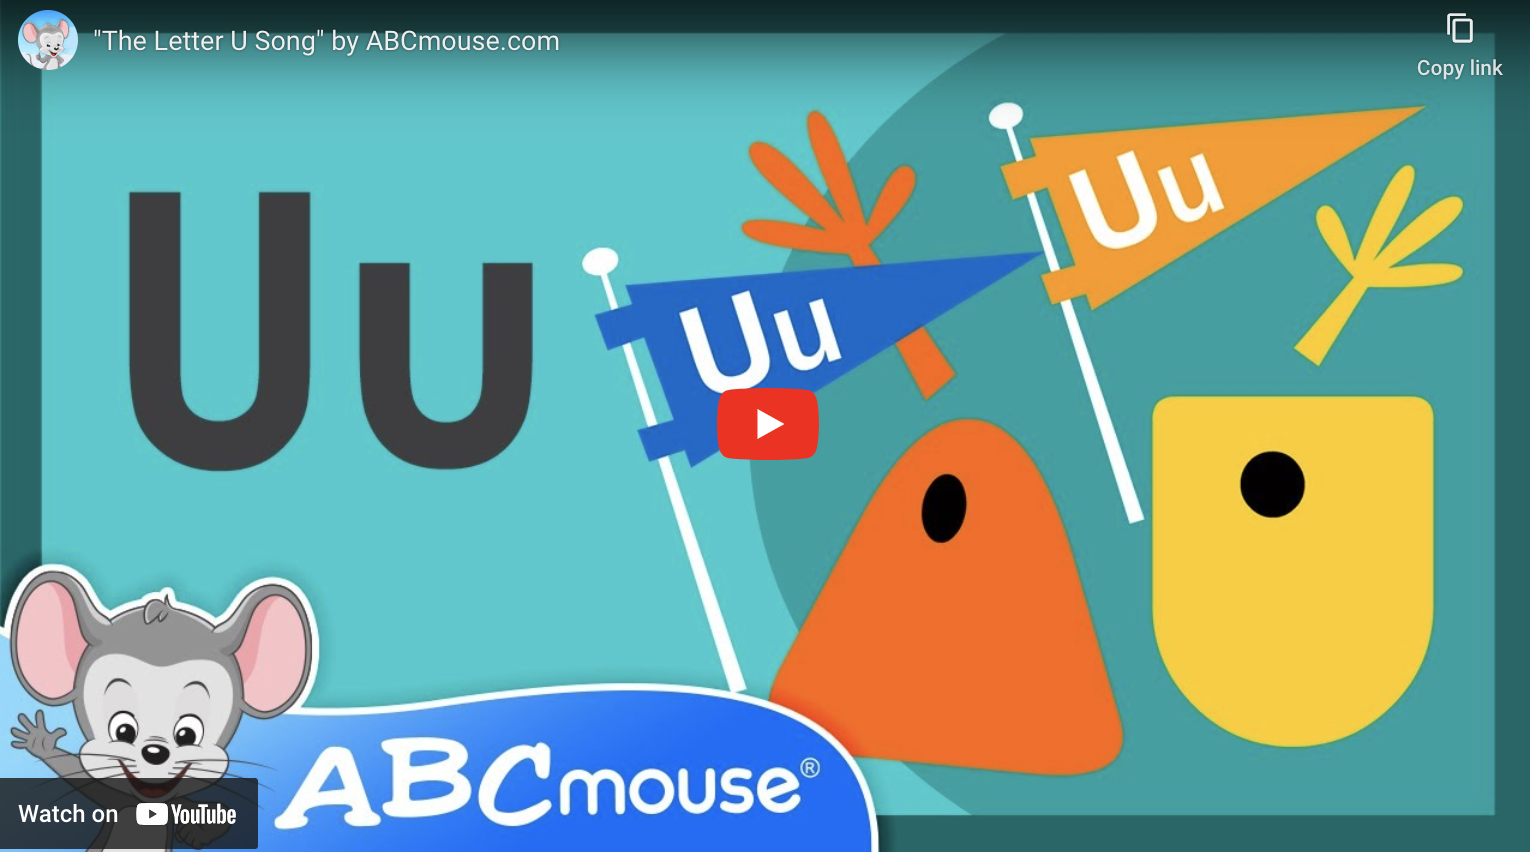 Letter u song from ABCmouse.com.